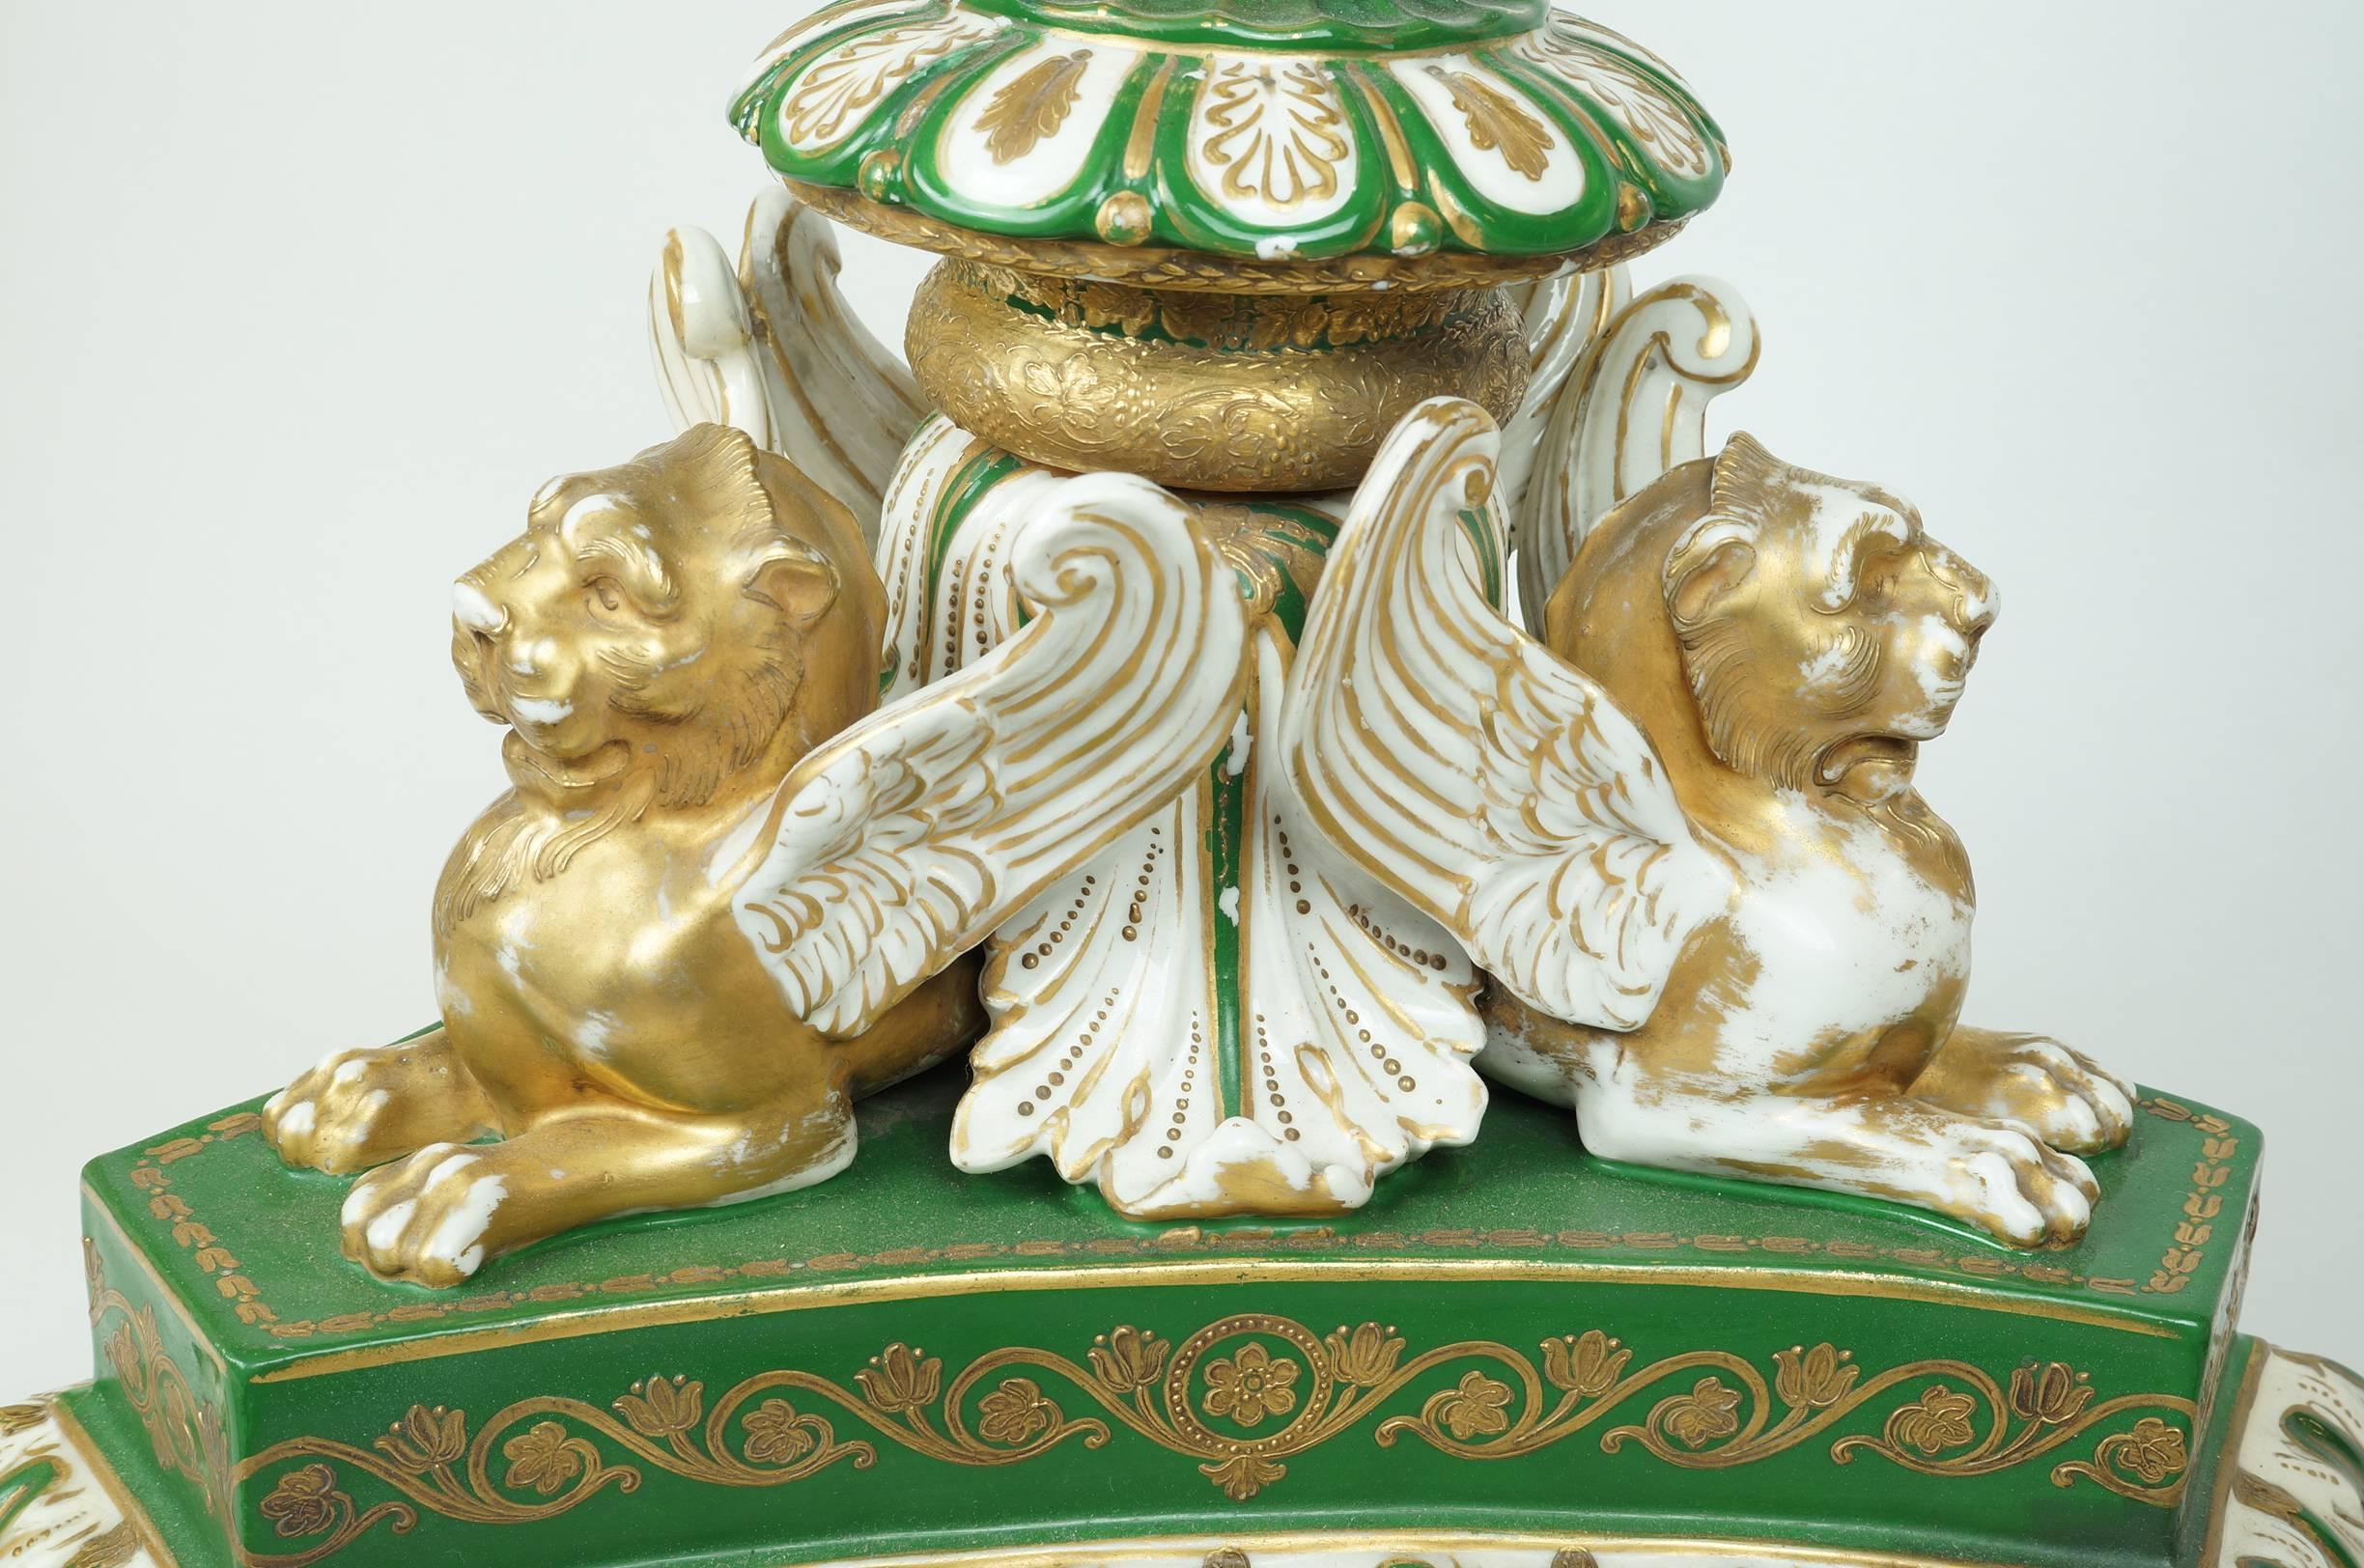 Napoleonic Green Sevres Porcelain Table with Winged Lion Figures For Sale 1